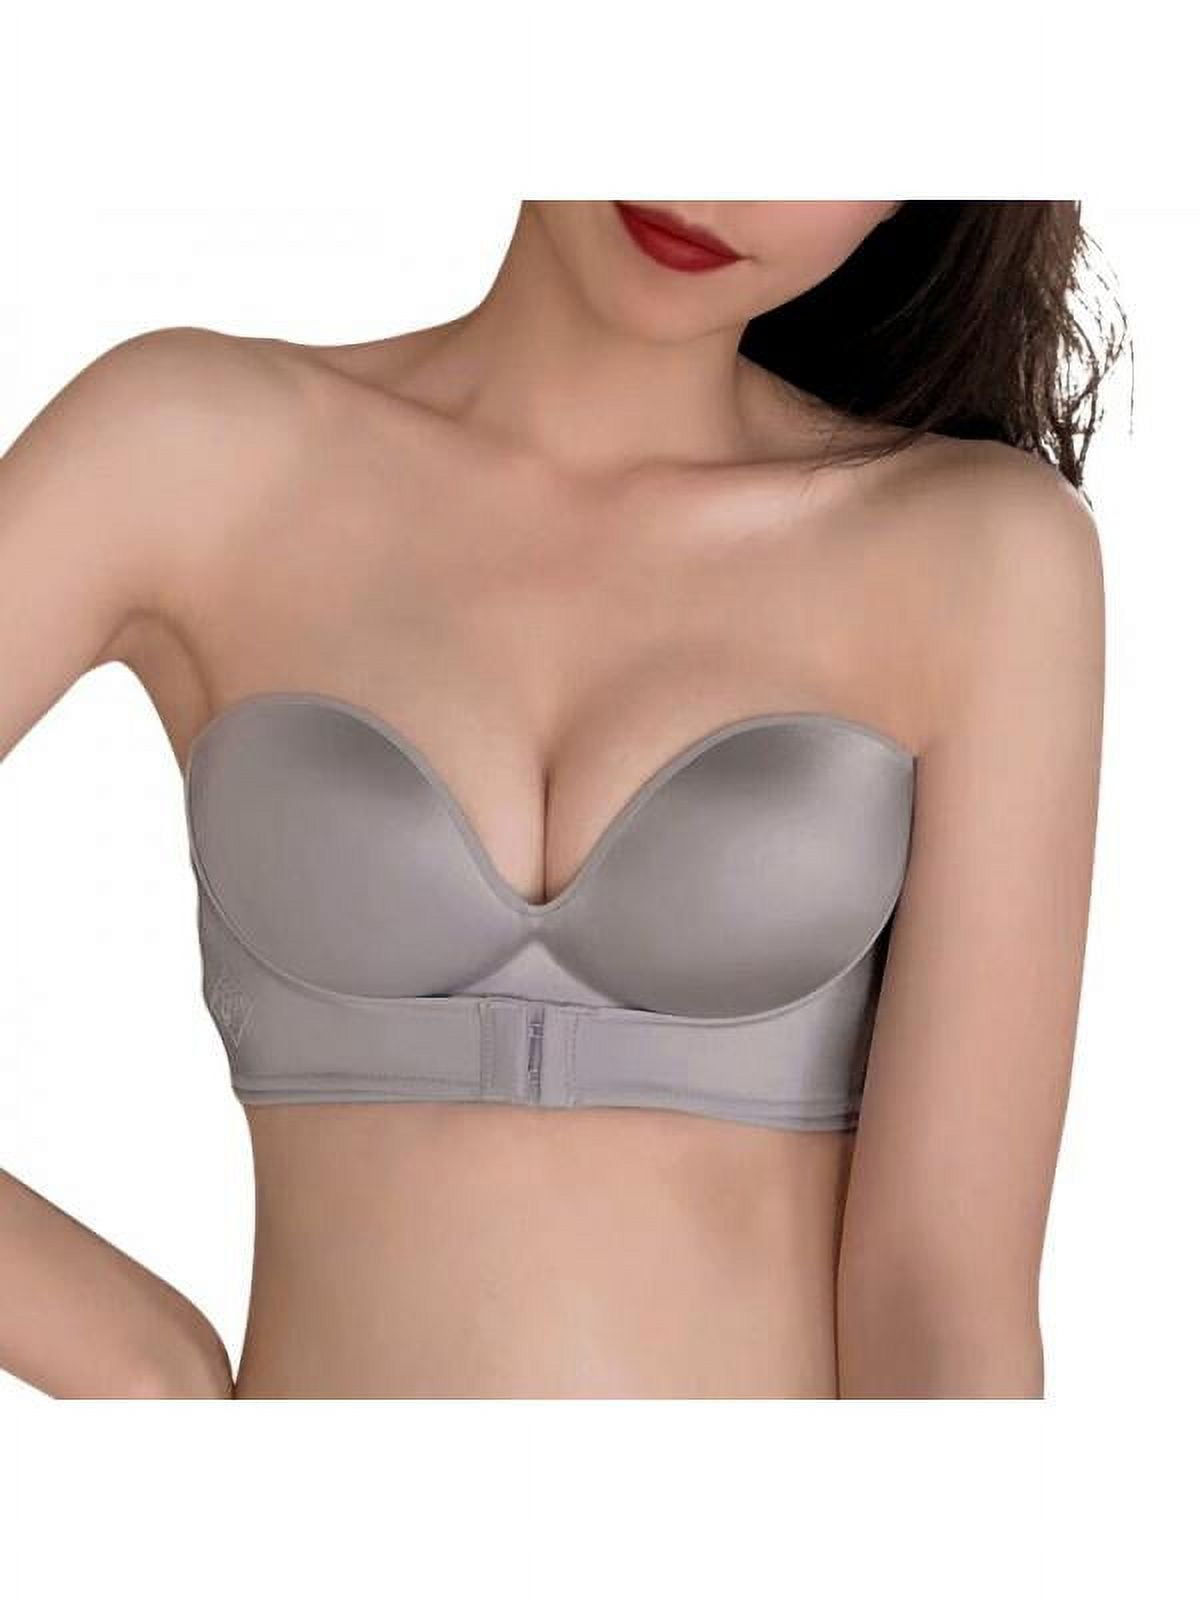 Alvage Strapless Bra Backless Bras Silicone Push up Bra for Women  Adjustable Shoudler Front Closure Bras 